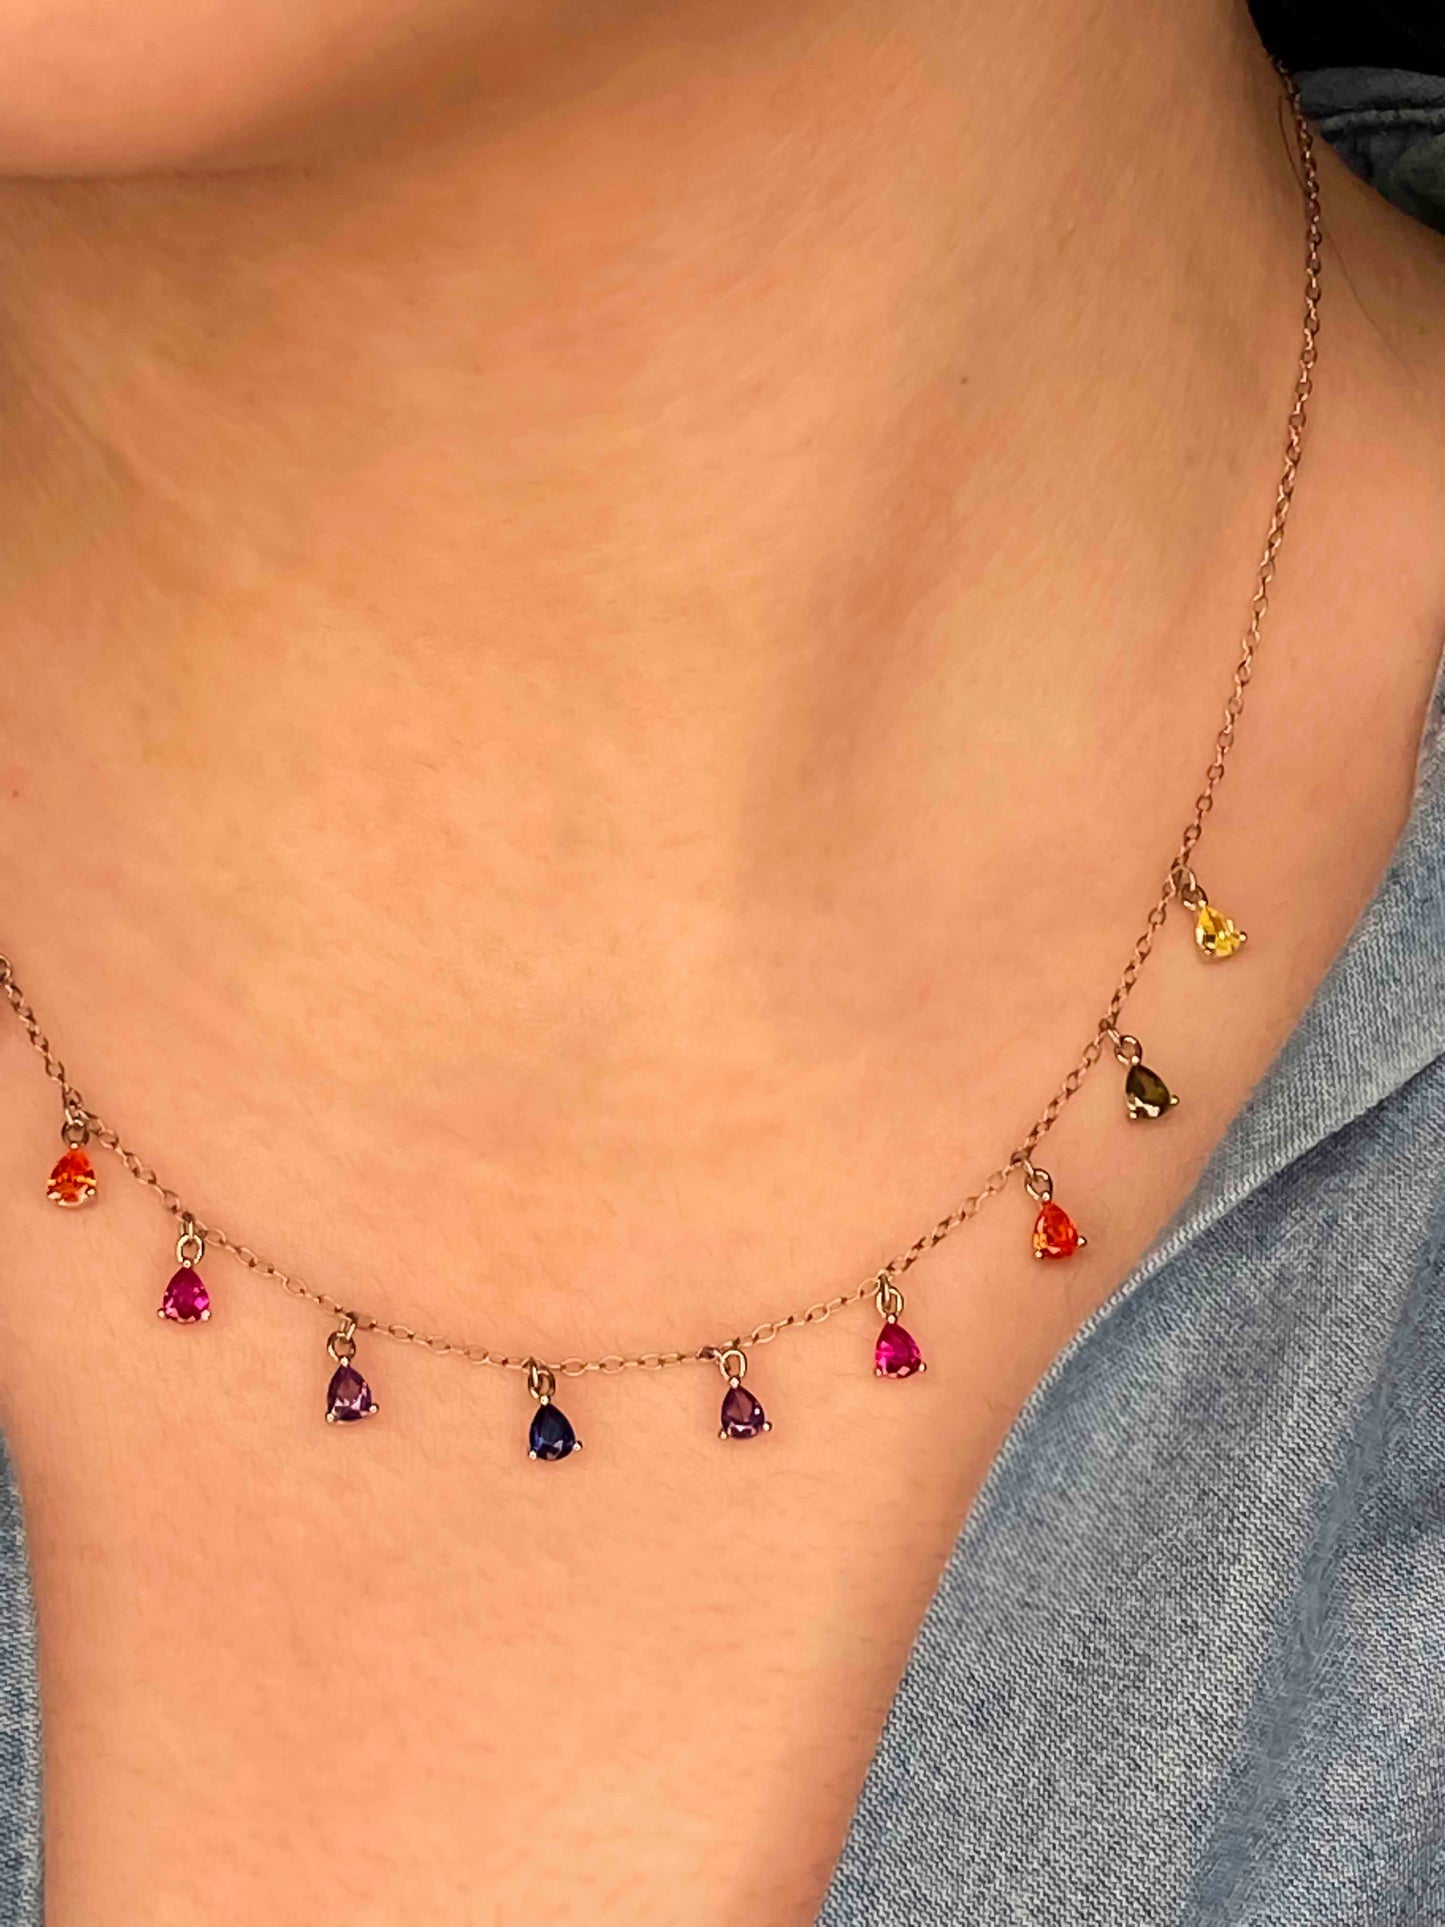 925 sterling silver chain necklace with multicolored zirconia stones. 